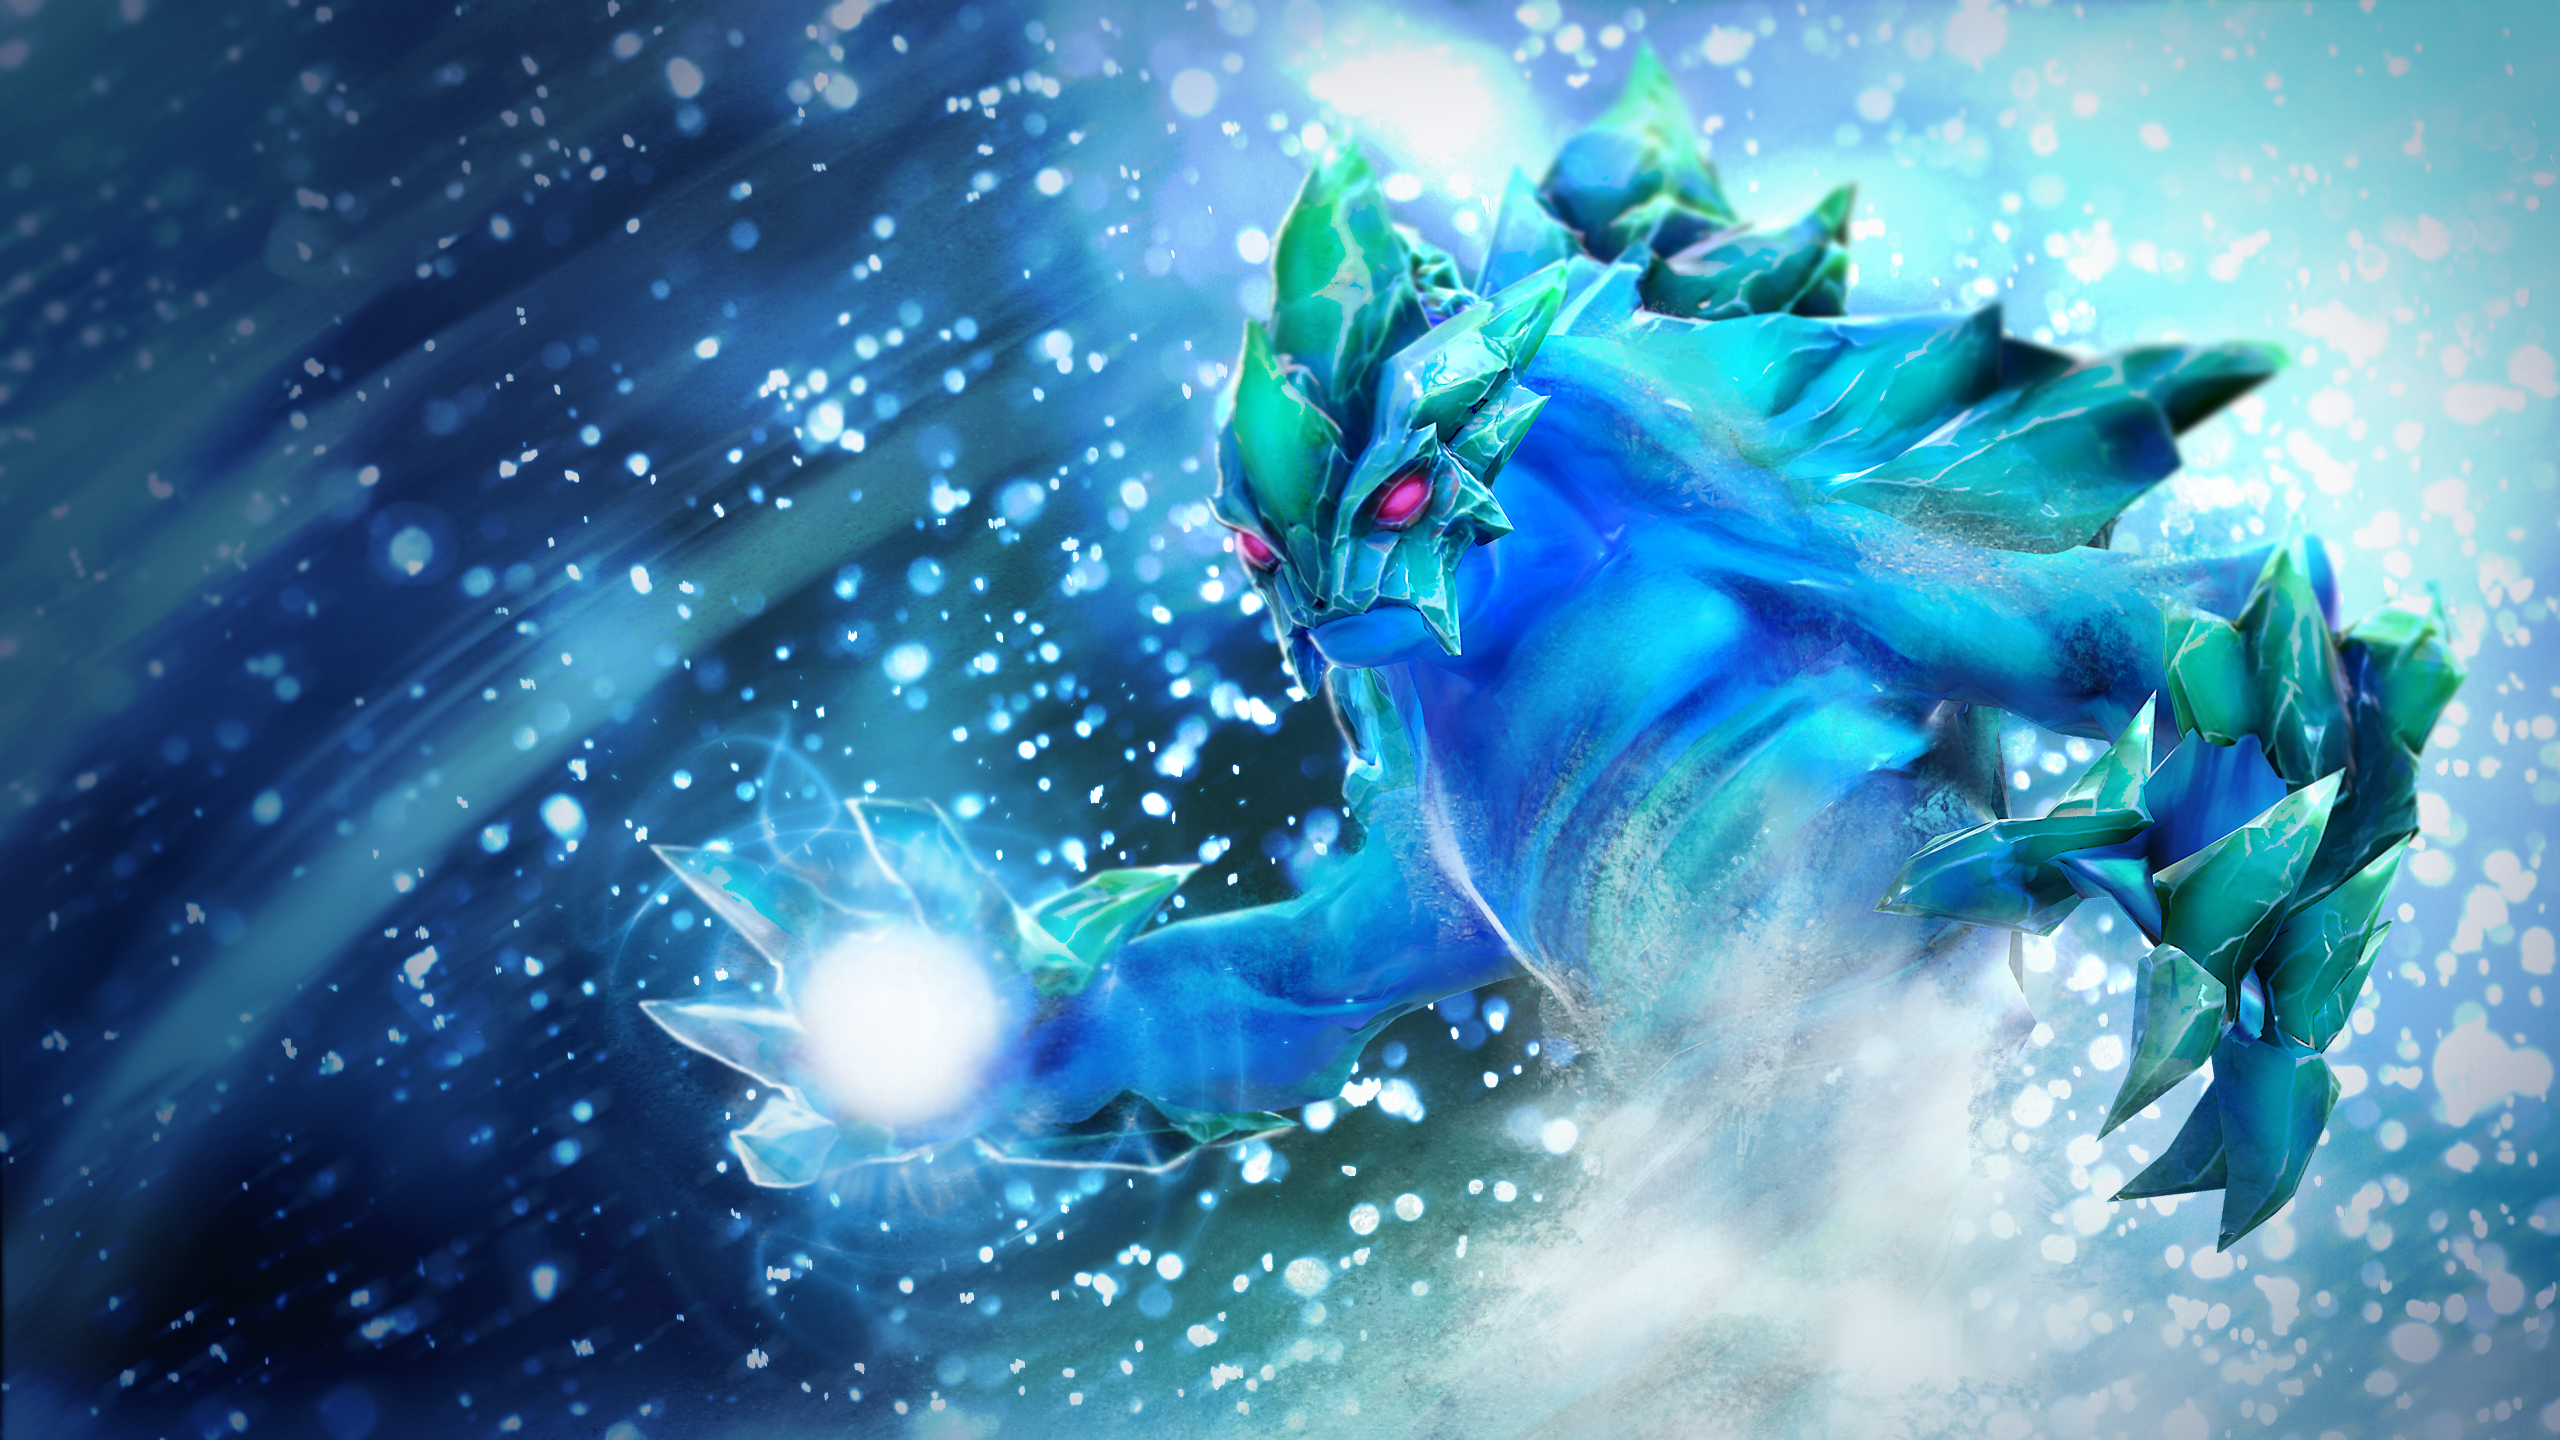 An elemental figure of water and ice charges forward holding an orb of blue light.